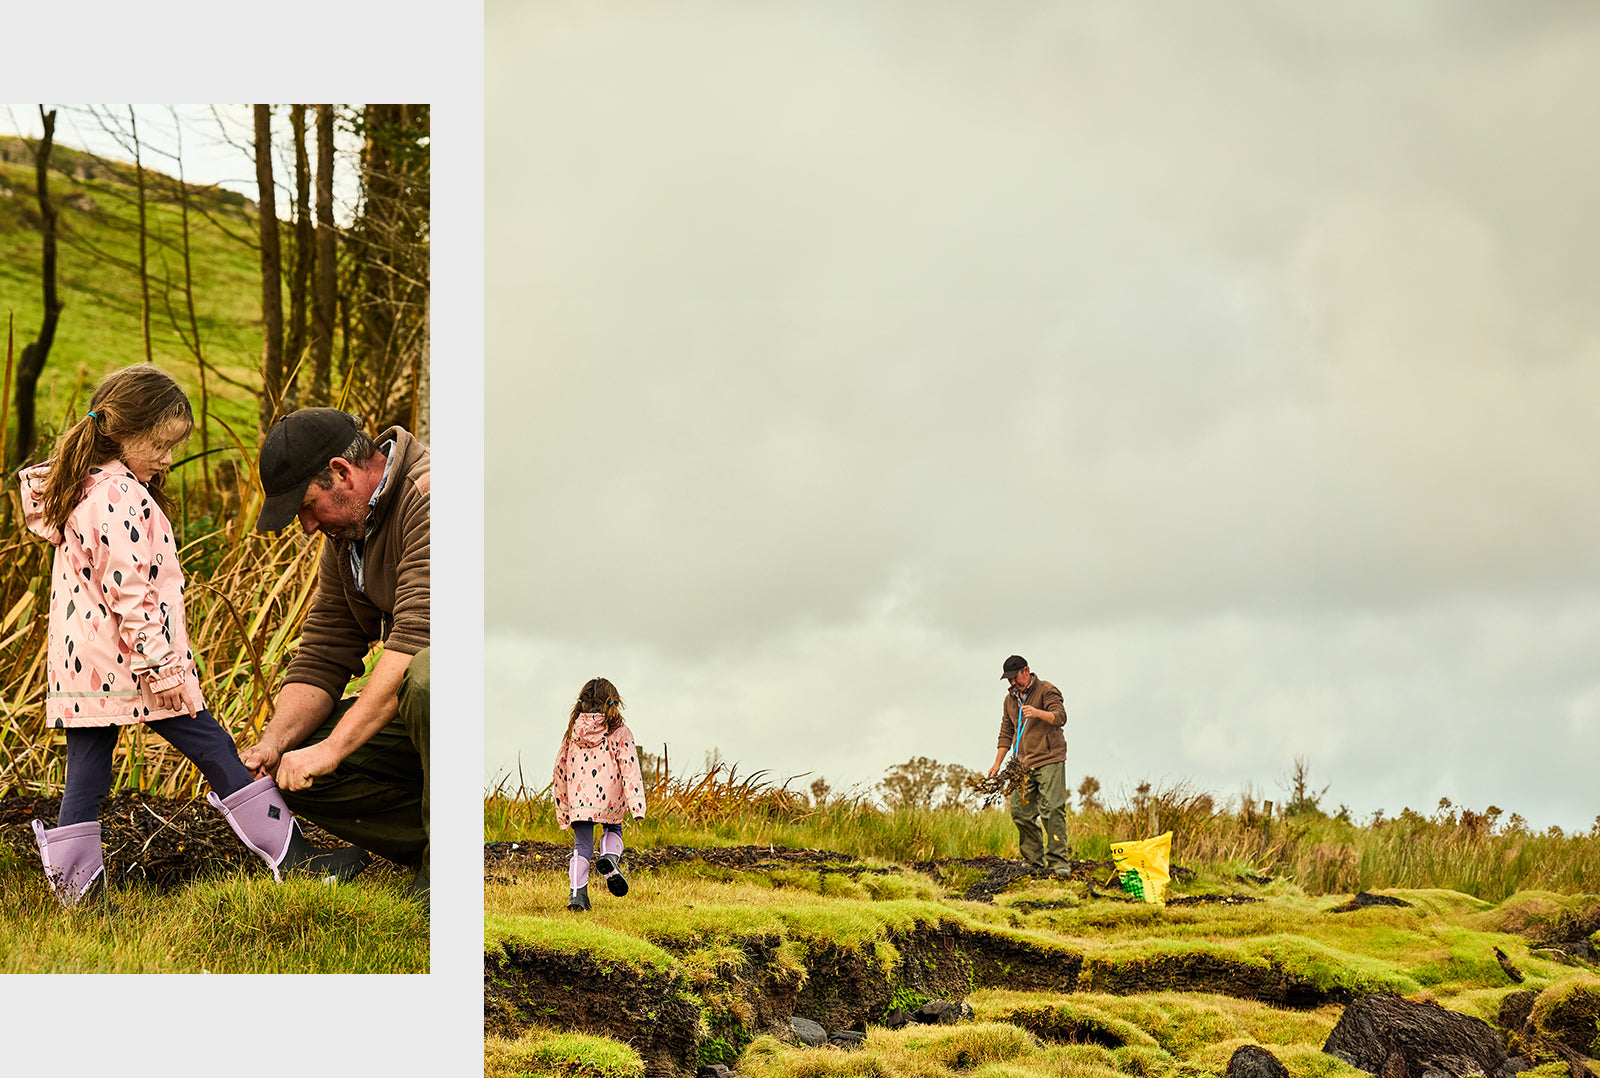 Main image of Sandy bringing up debris from a boggy ground with his daughter walking towards him, wearing a pink jacket and pair of Muck Boot wellingtons. Inset Sandy is helping his daughter put her foot in a Muck Boot wellington.